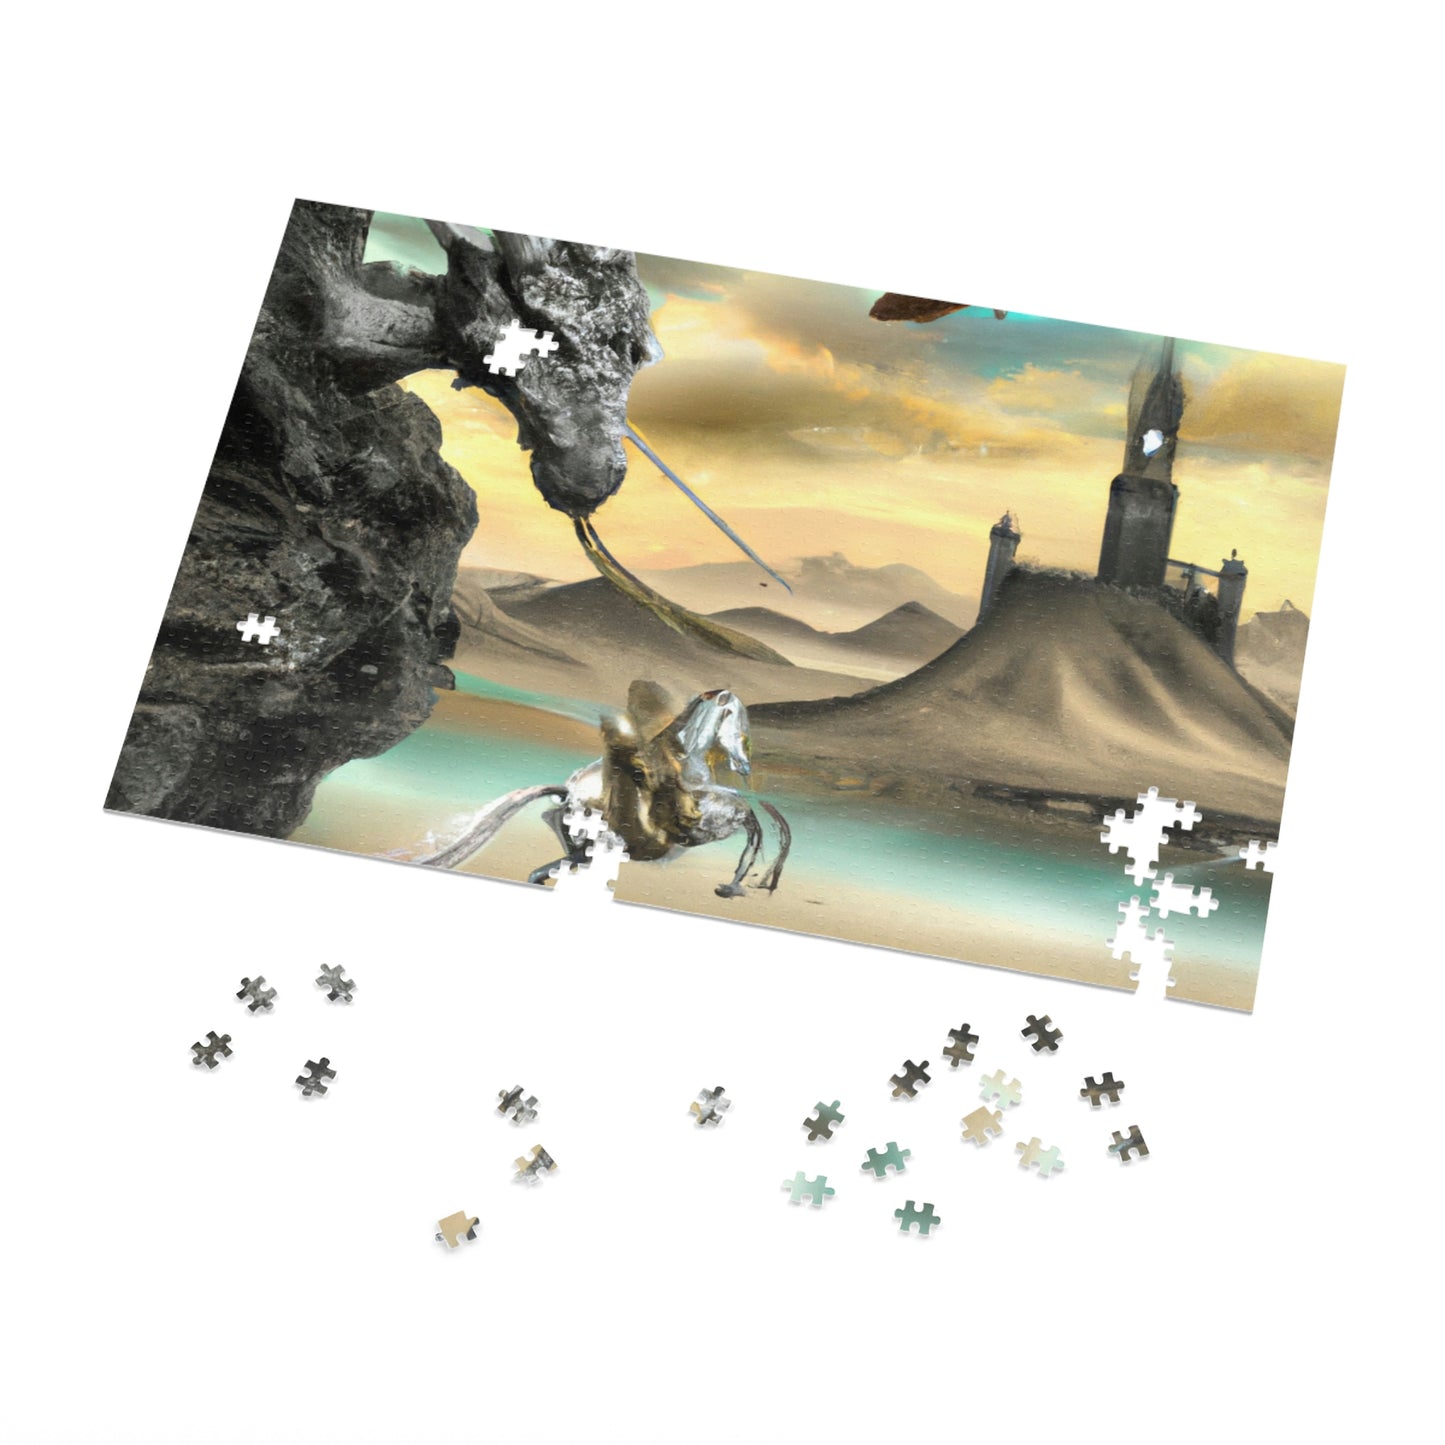 The Knight and the Dragon's Throne - The Alien Jigsaw Puzzle